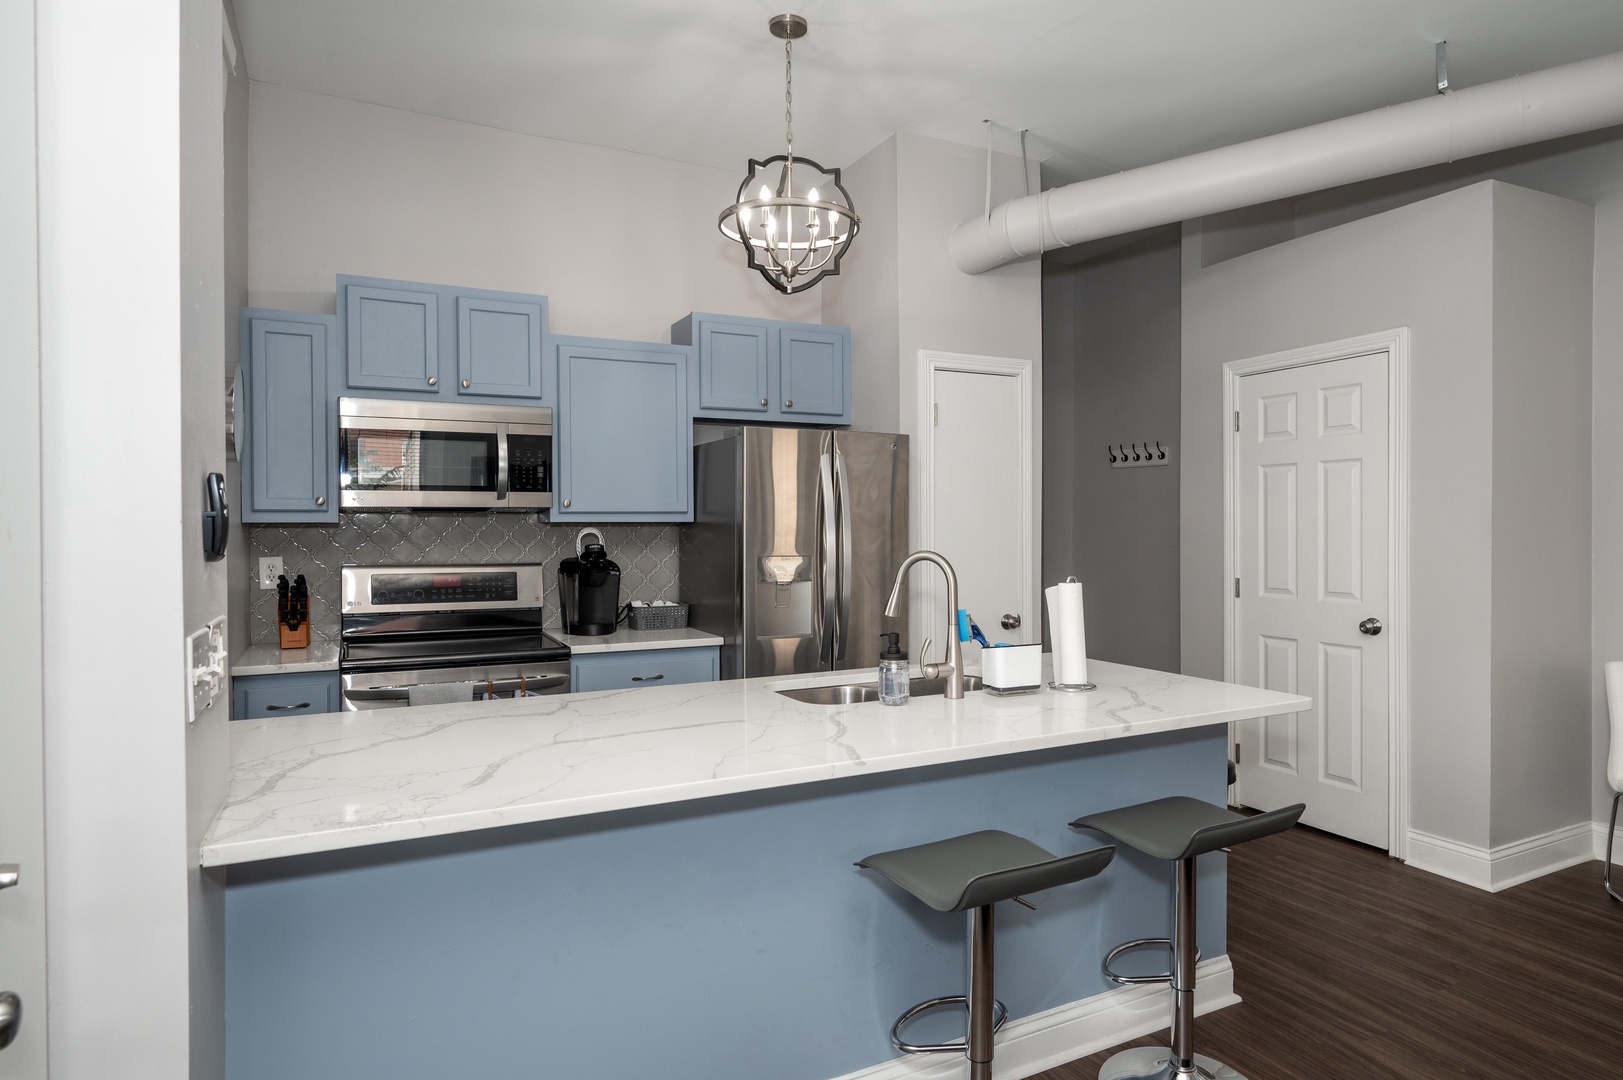 Apt 3 – The sprawling kitchen counter offers additional seating for 2